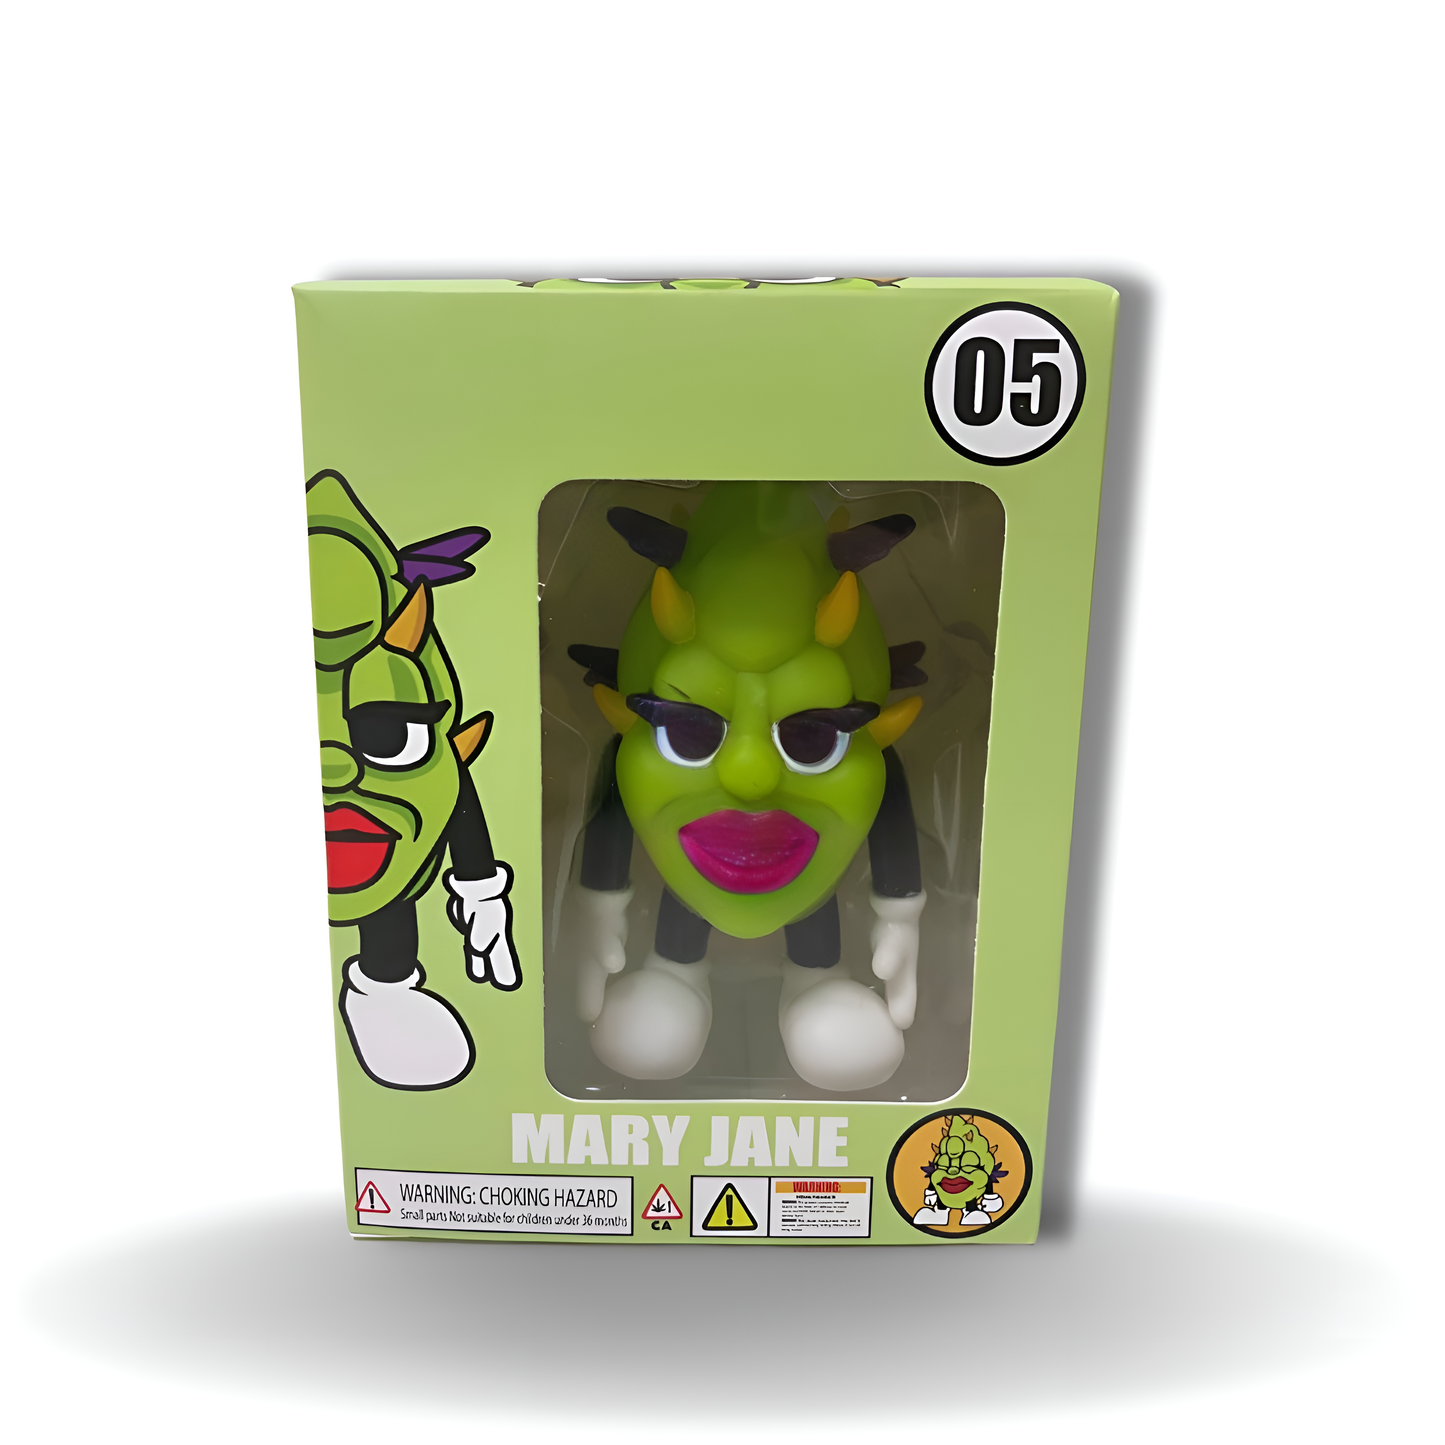 Mary Jane Limited Edition Collectible 1 of 500, 4-inch hand-painted figures, with first edition collectible box